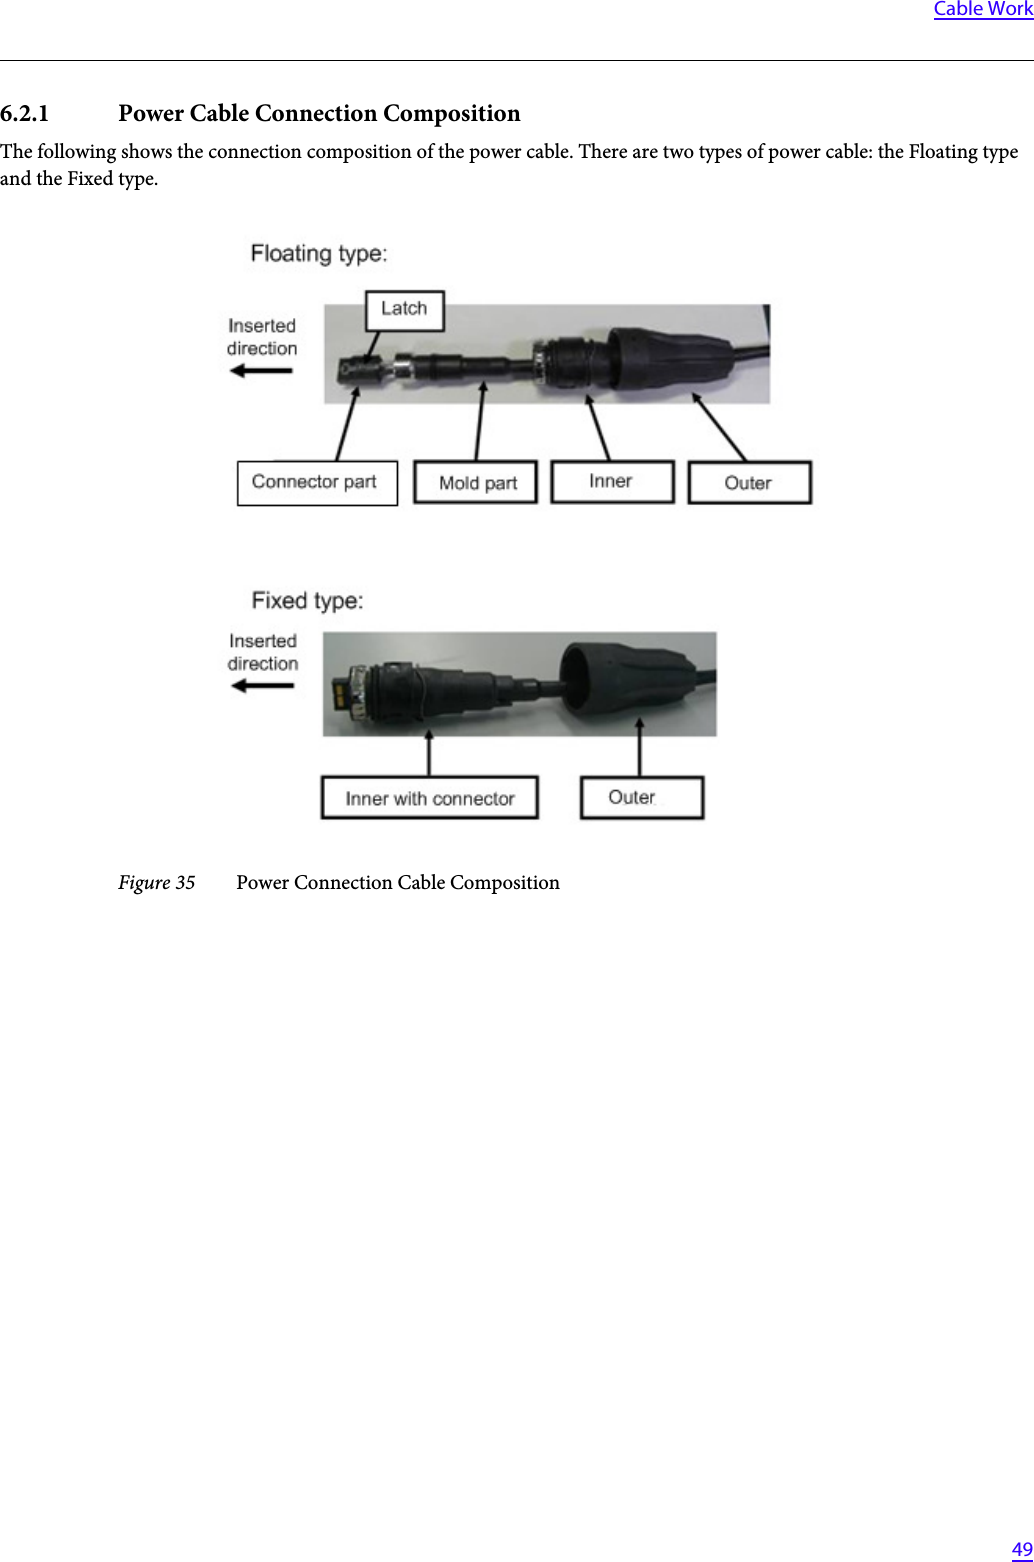   49Cable Work6.2.1 Power Cable Connection CompositionThe following shows the connection composition of the power cable. There are two types of power cable: the Floating type and the Fixed type.Figure 35 Power Connection Cable Composition